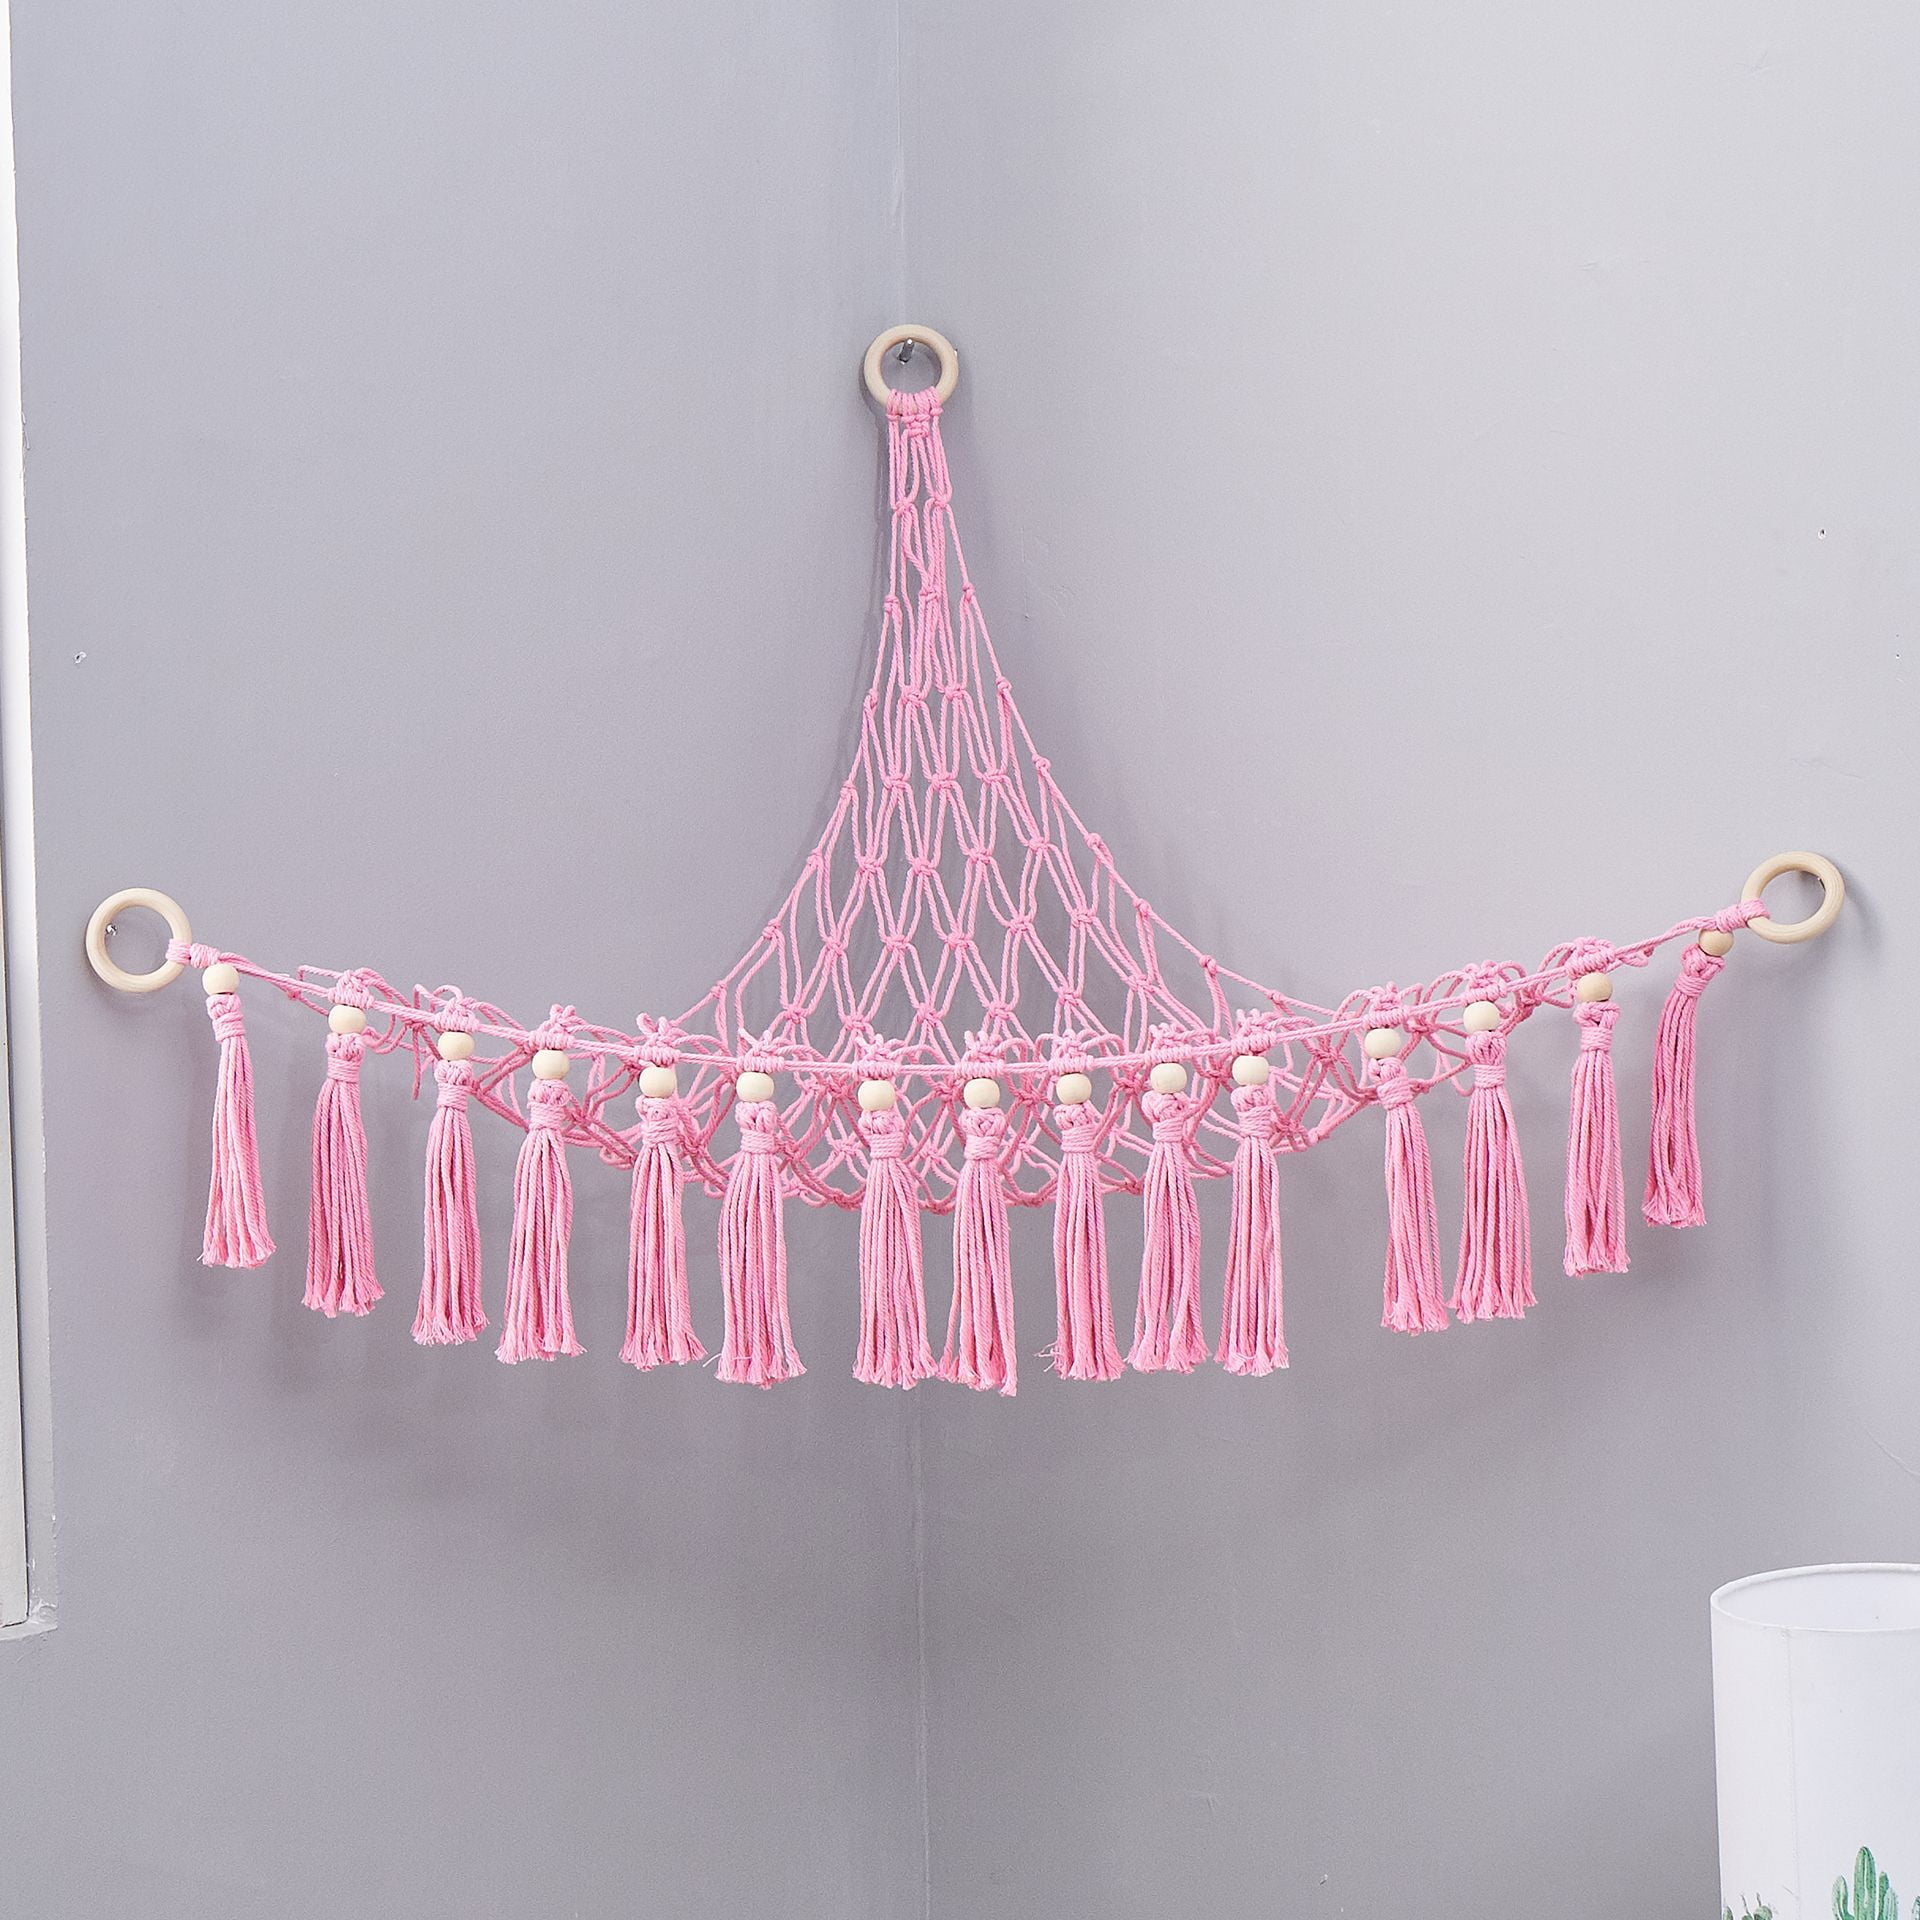  Stuffed Animals Net or Hammock with LED Light,Stuffed Animal  Toy Storage, Large Corner Mesh Toy organizer Hanging Wall Toys storage with  Tassels and beads for kids Room, Nursey, Playroom,Bedroom : Baby